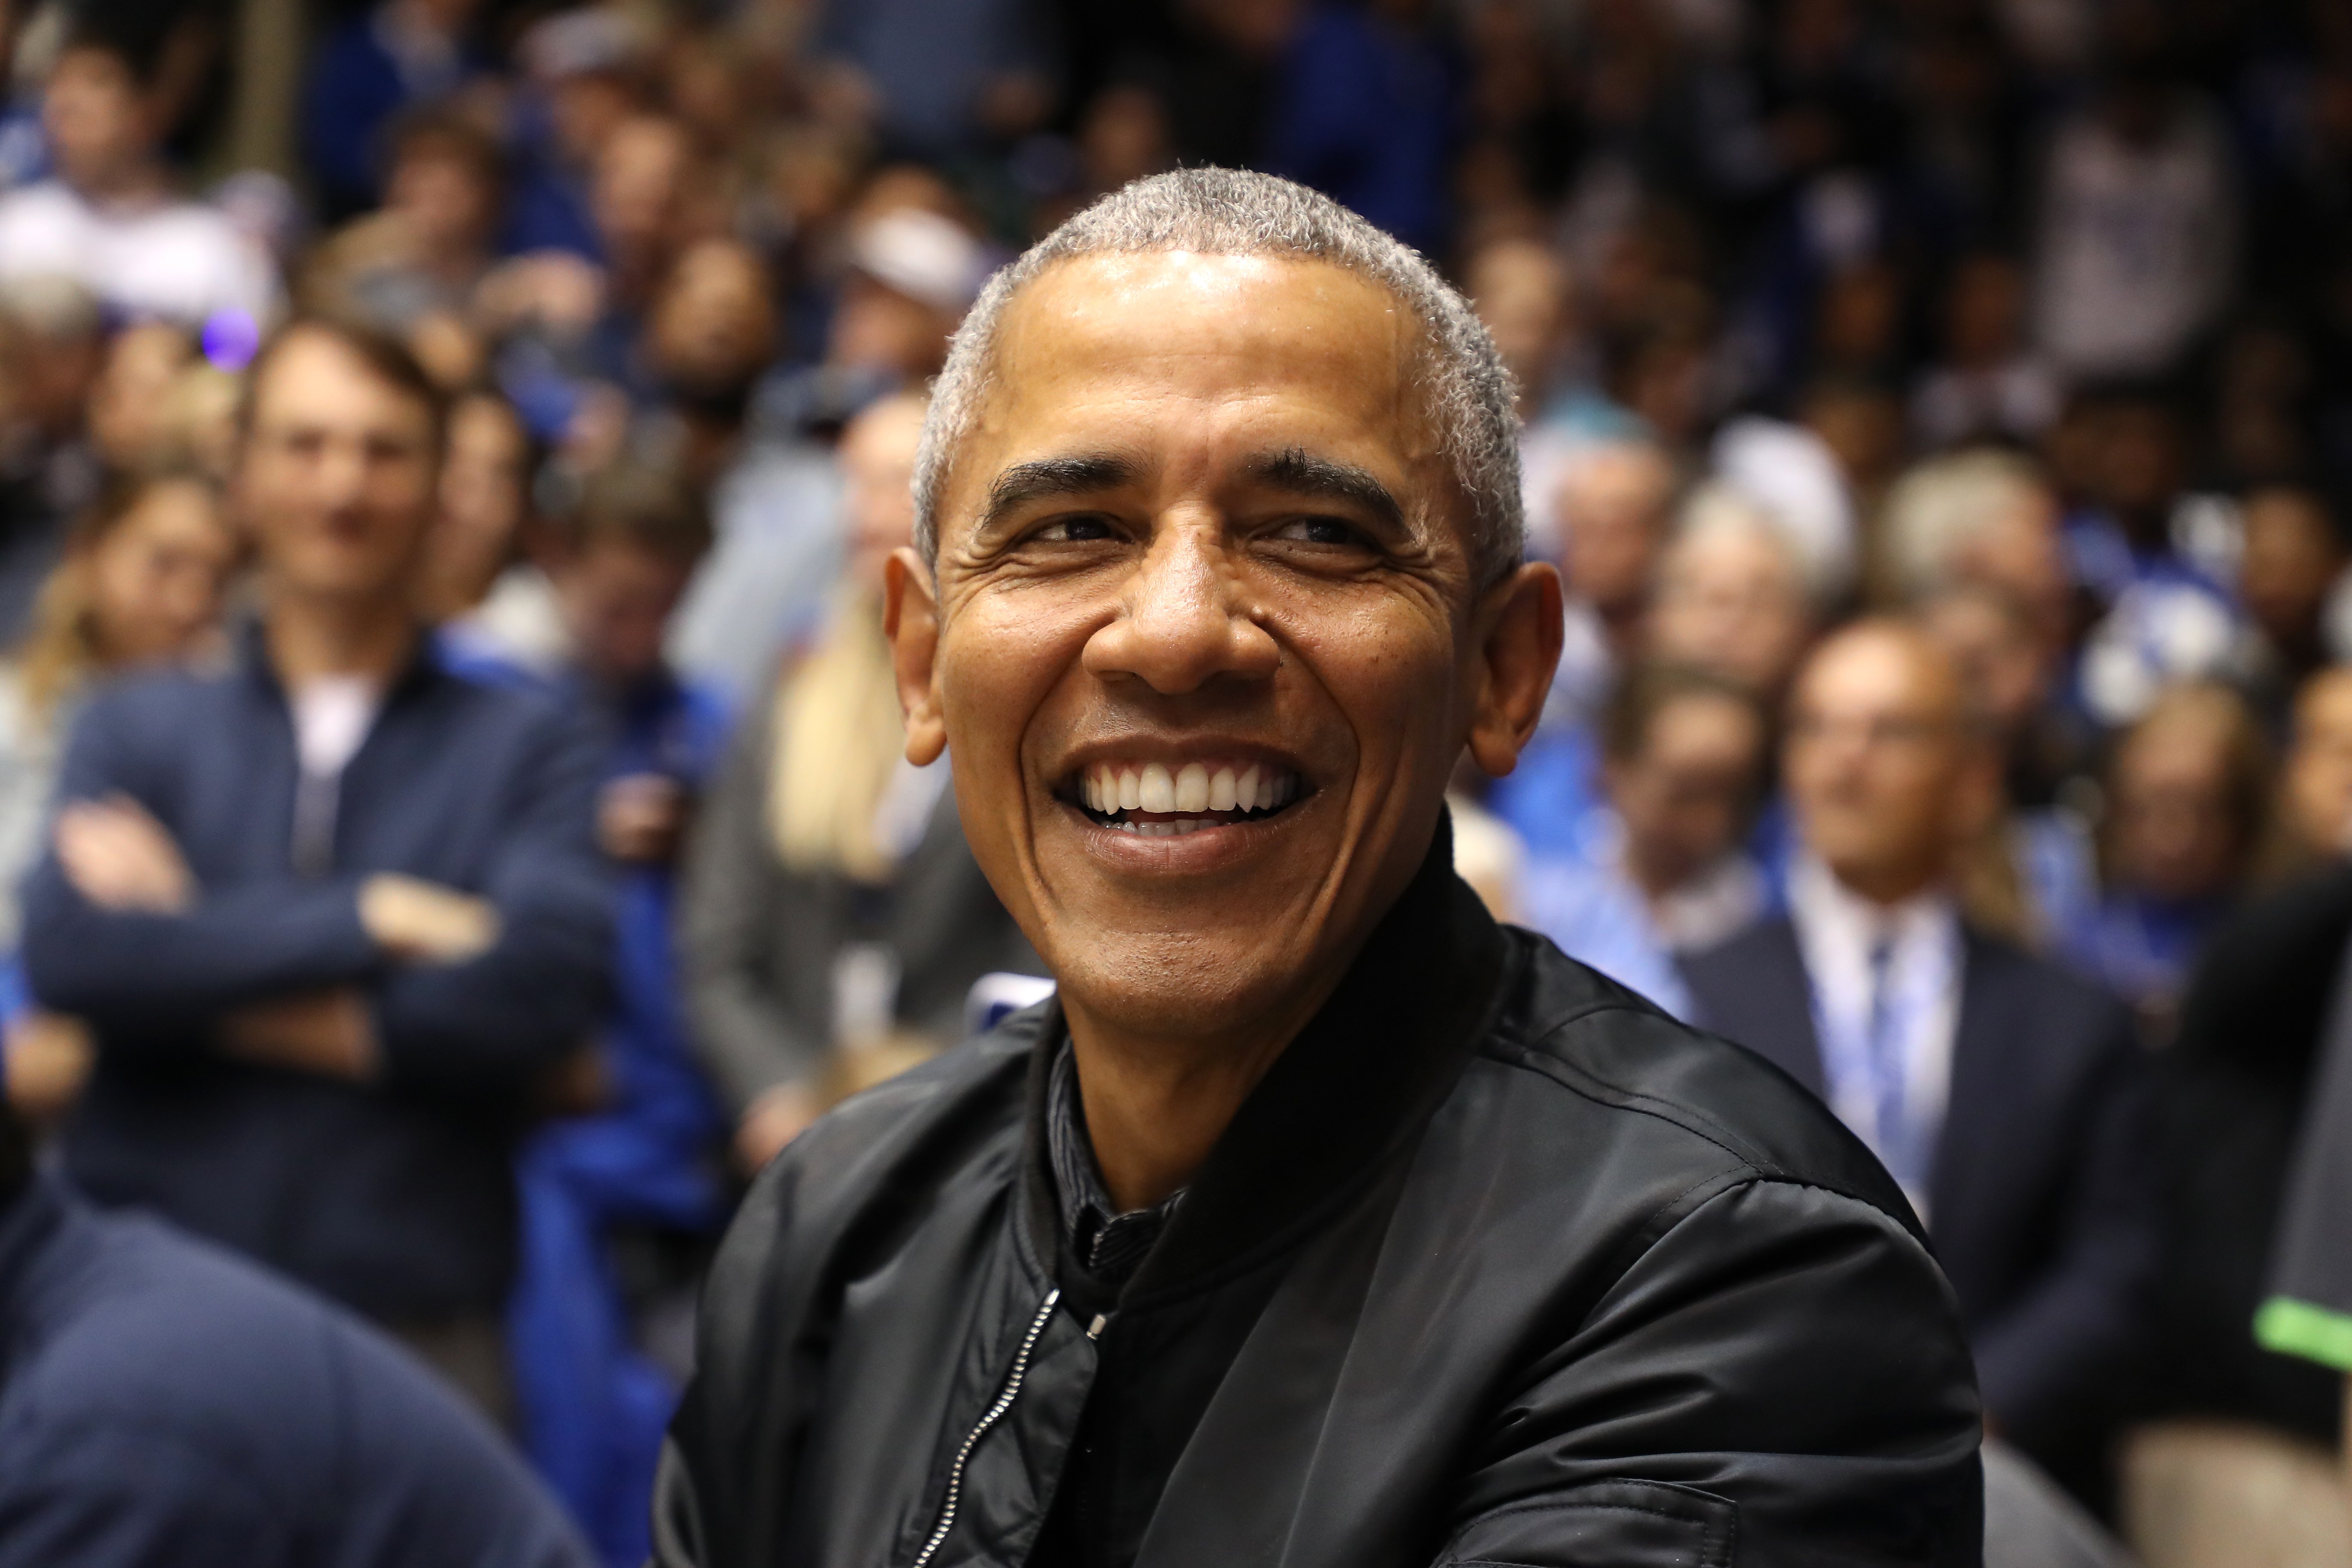 Barack Obama attends a basketball game on February 20, 2019, in Durham, North Carolina. | Source: Getty Images.